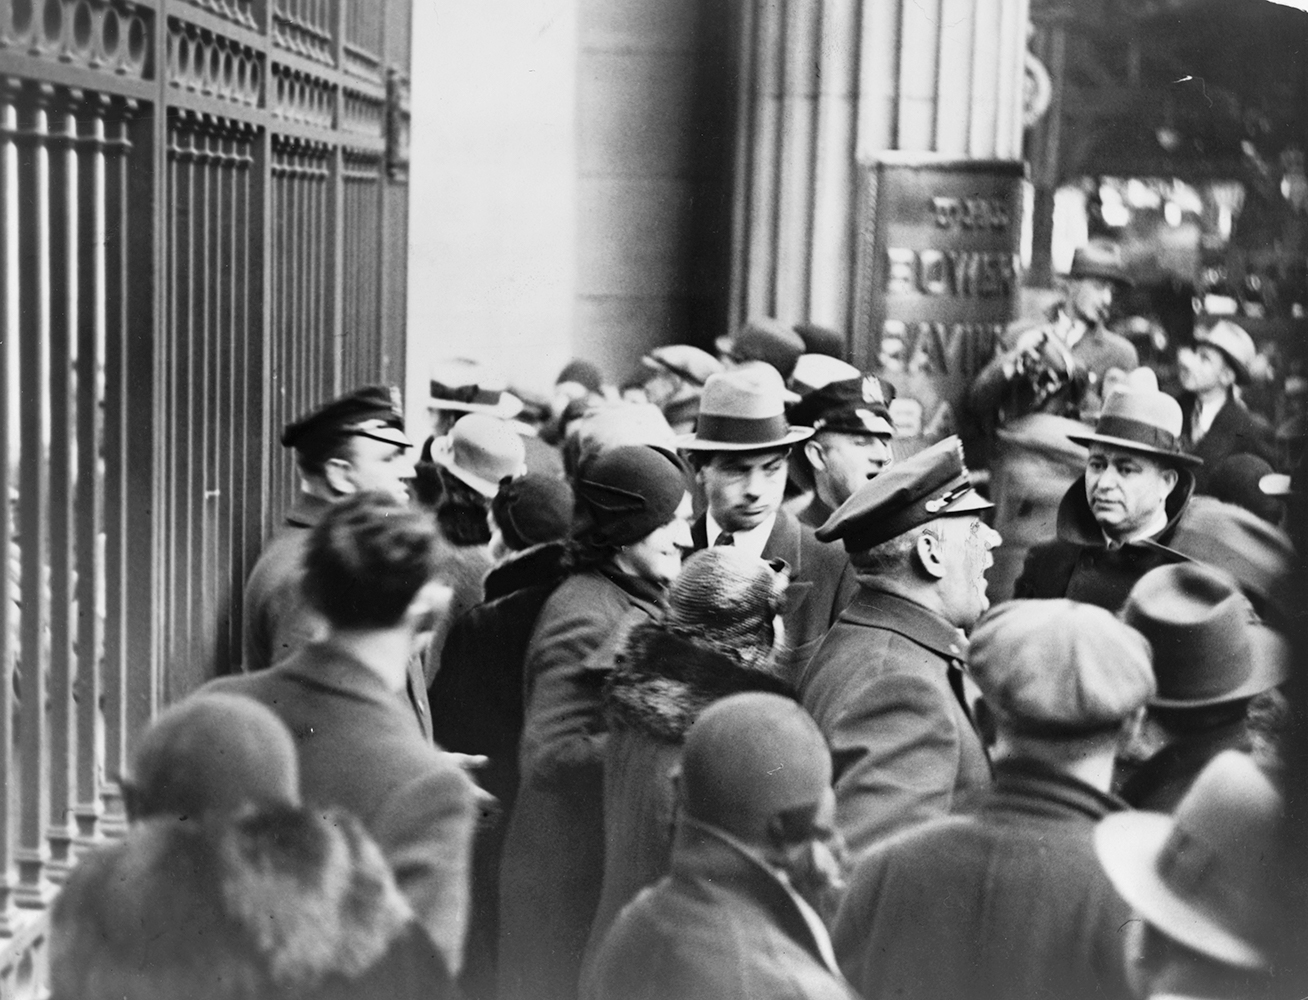 Policemen try to control a crowd of people during a bank run. On the left closed iron doors to the bank are visible. Image link will enlarge image.